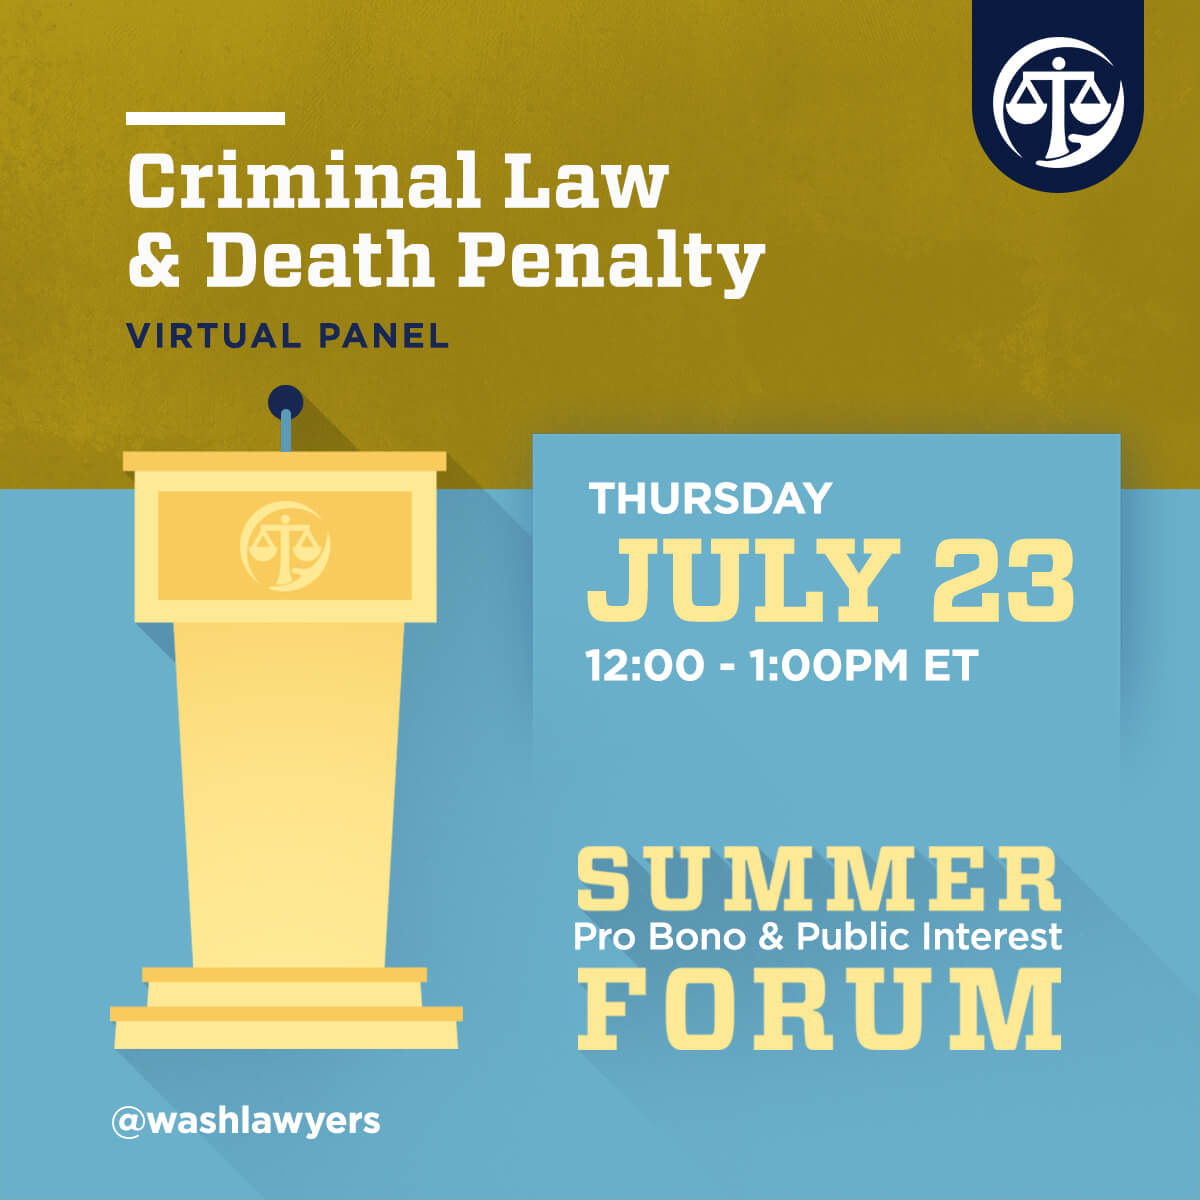 Graphic: Criminal Law & Death Penalty panel event